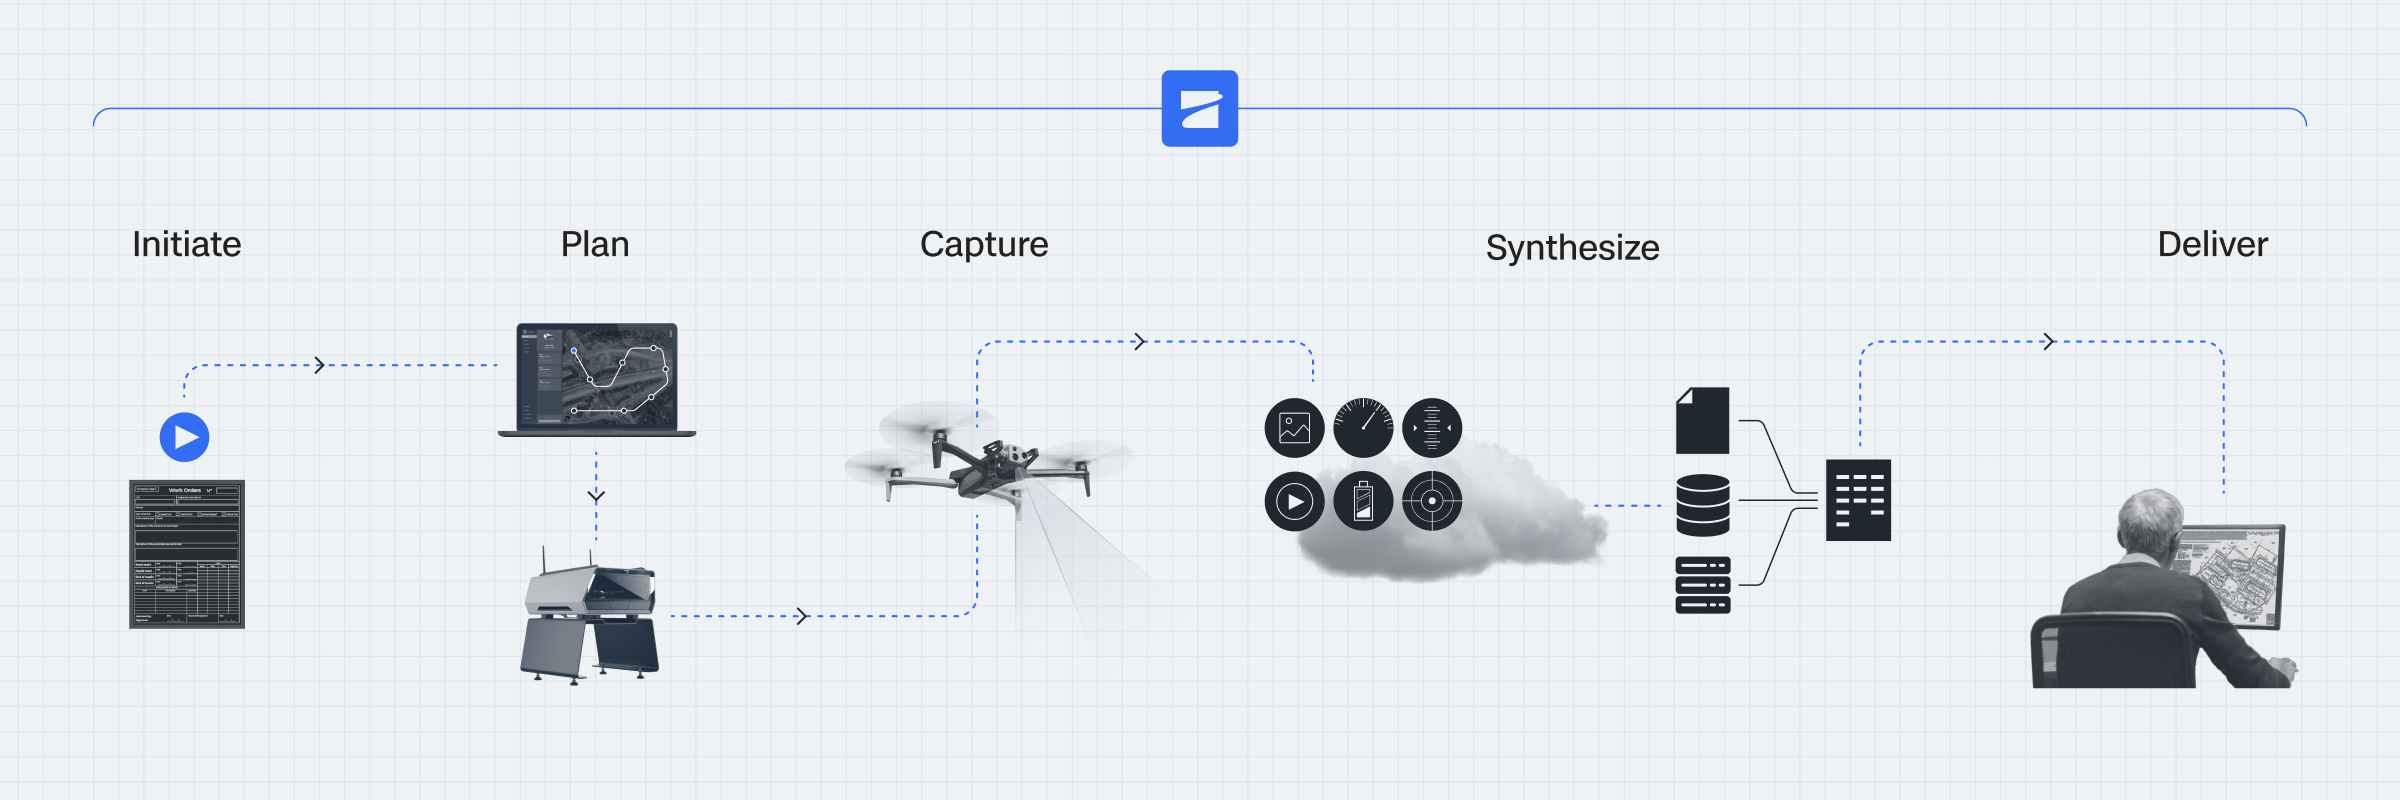 A typical aerial data capture workflow from work order to mission planning, to capturing, syncing, aggregating, and analyzing the data